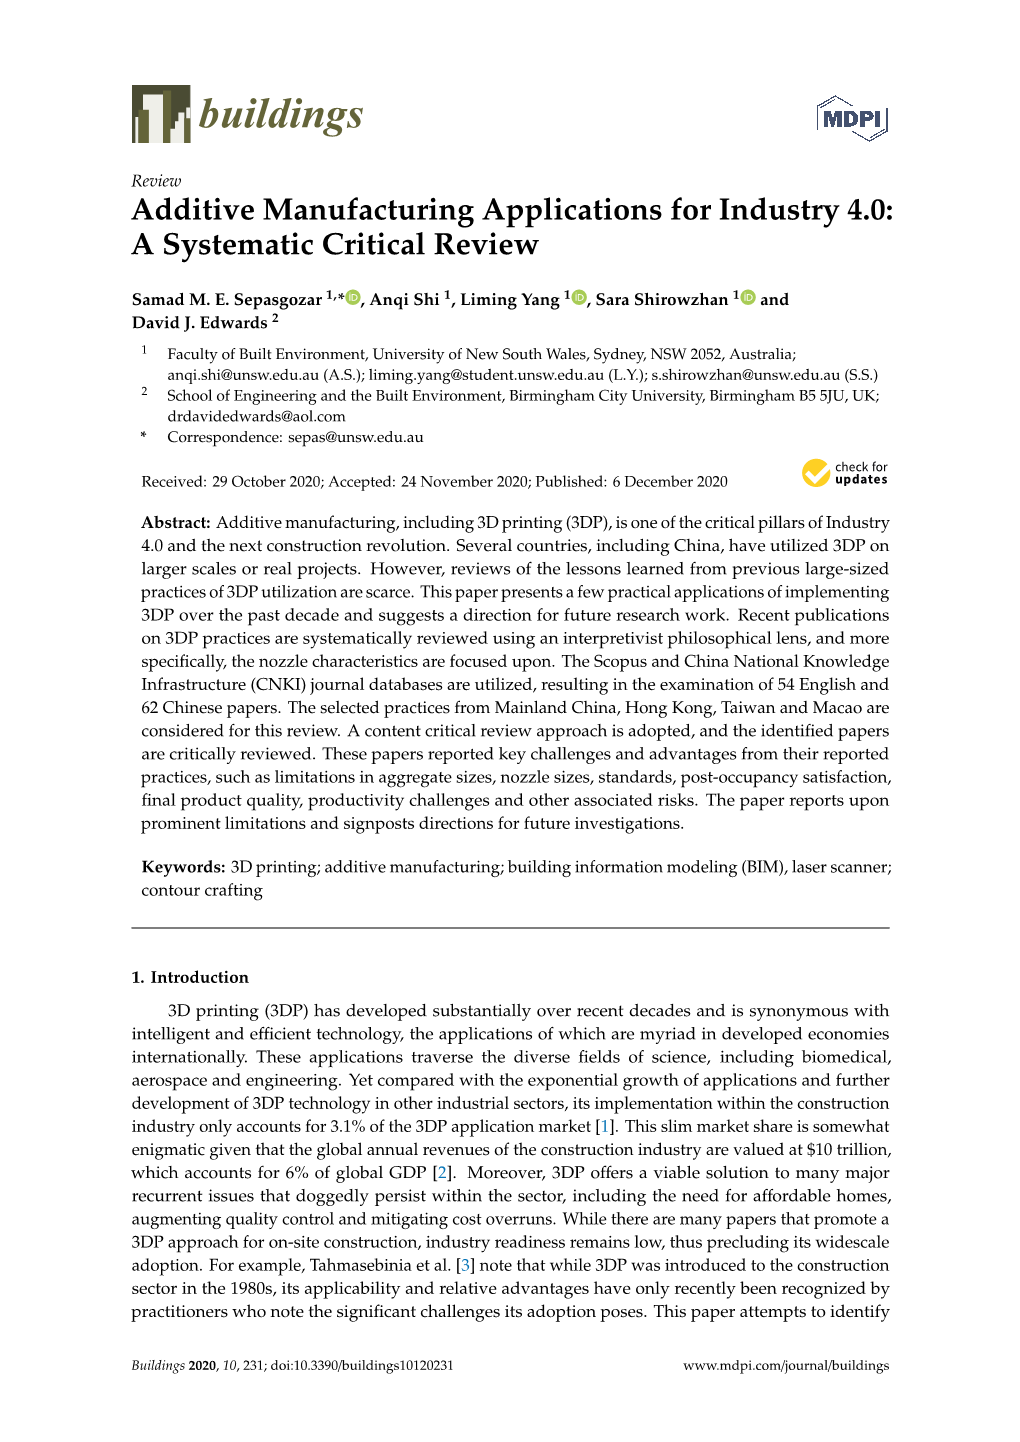 Additive Manufacturing Applications for Industry 4.0: a Systematic Critical Review